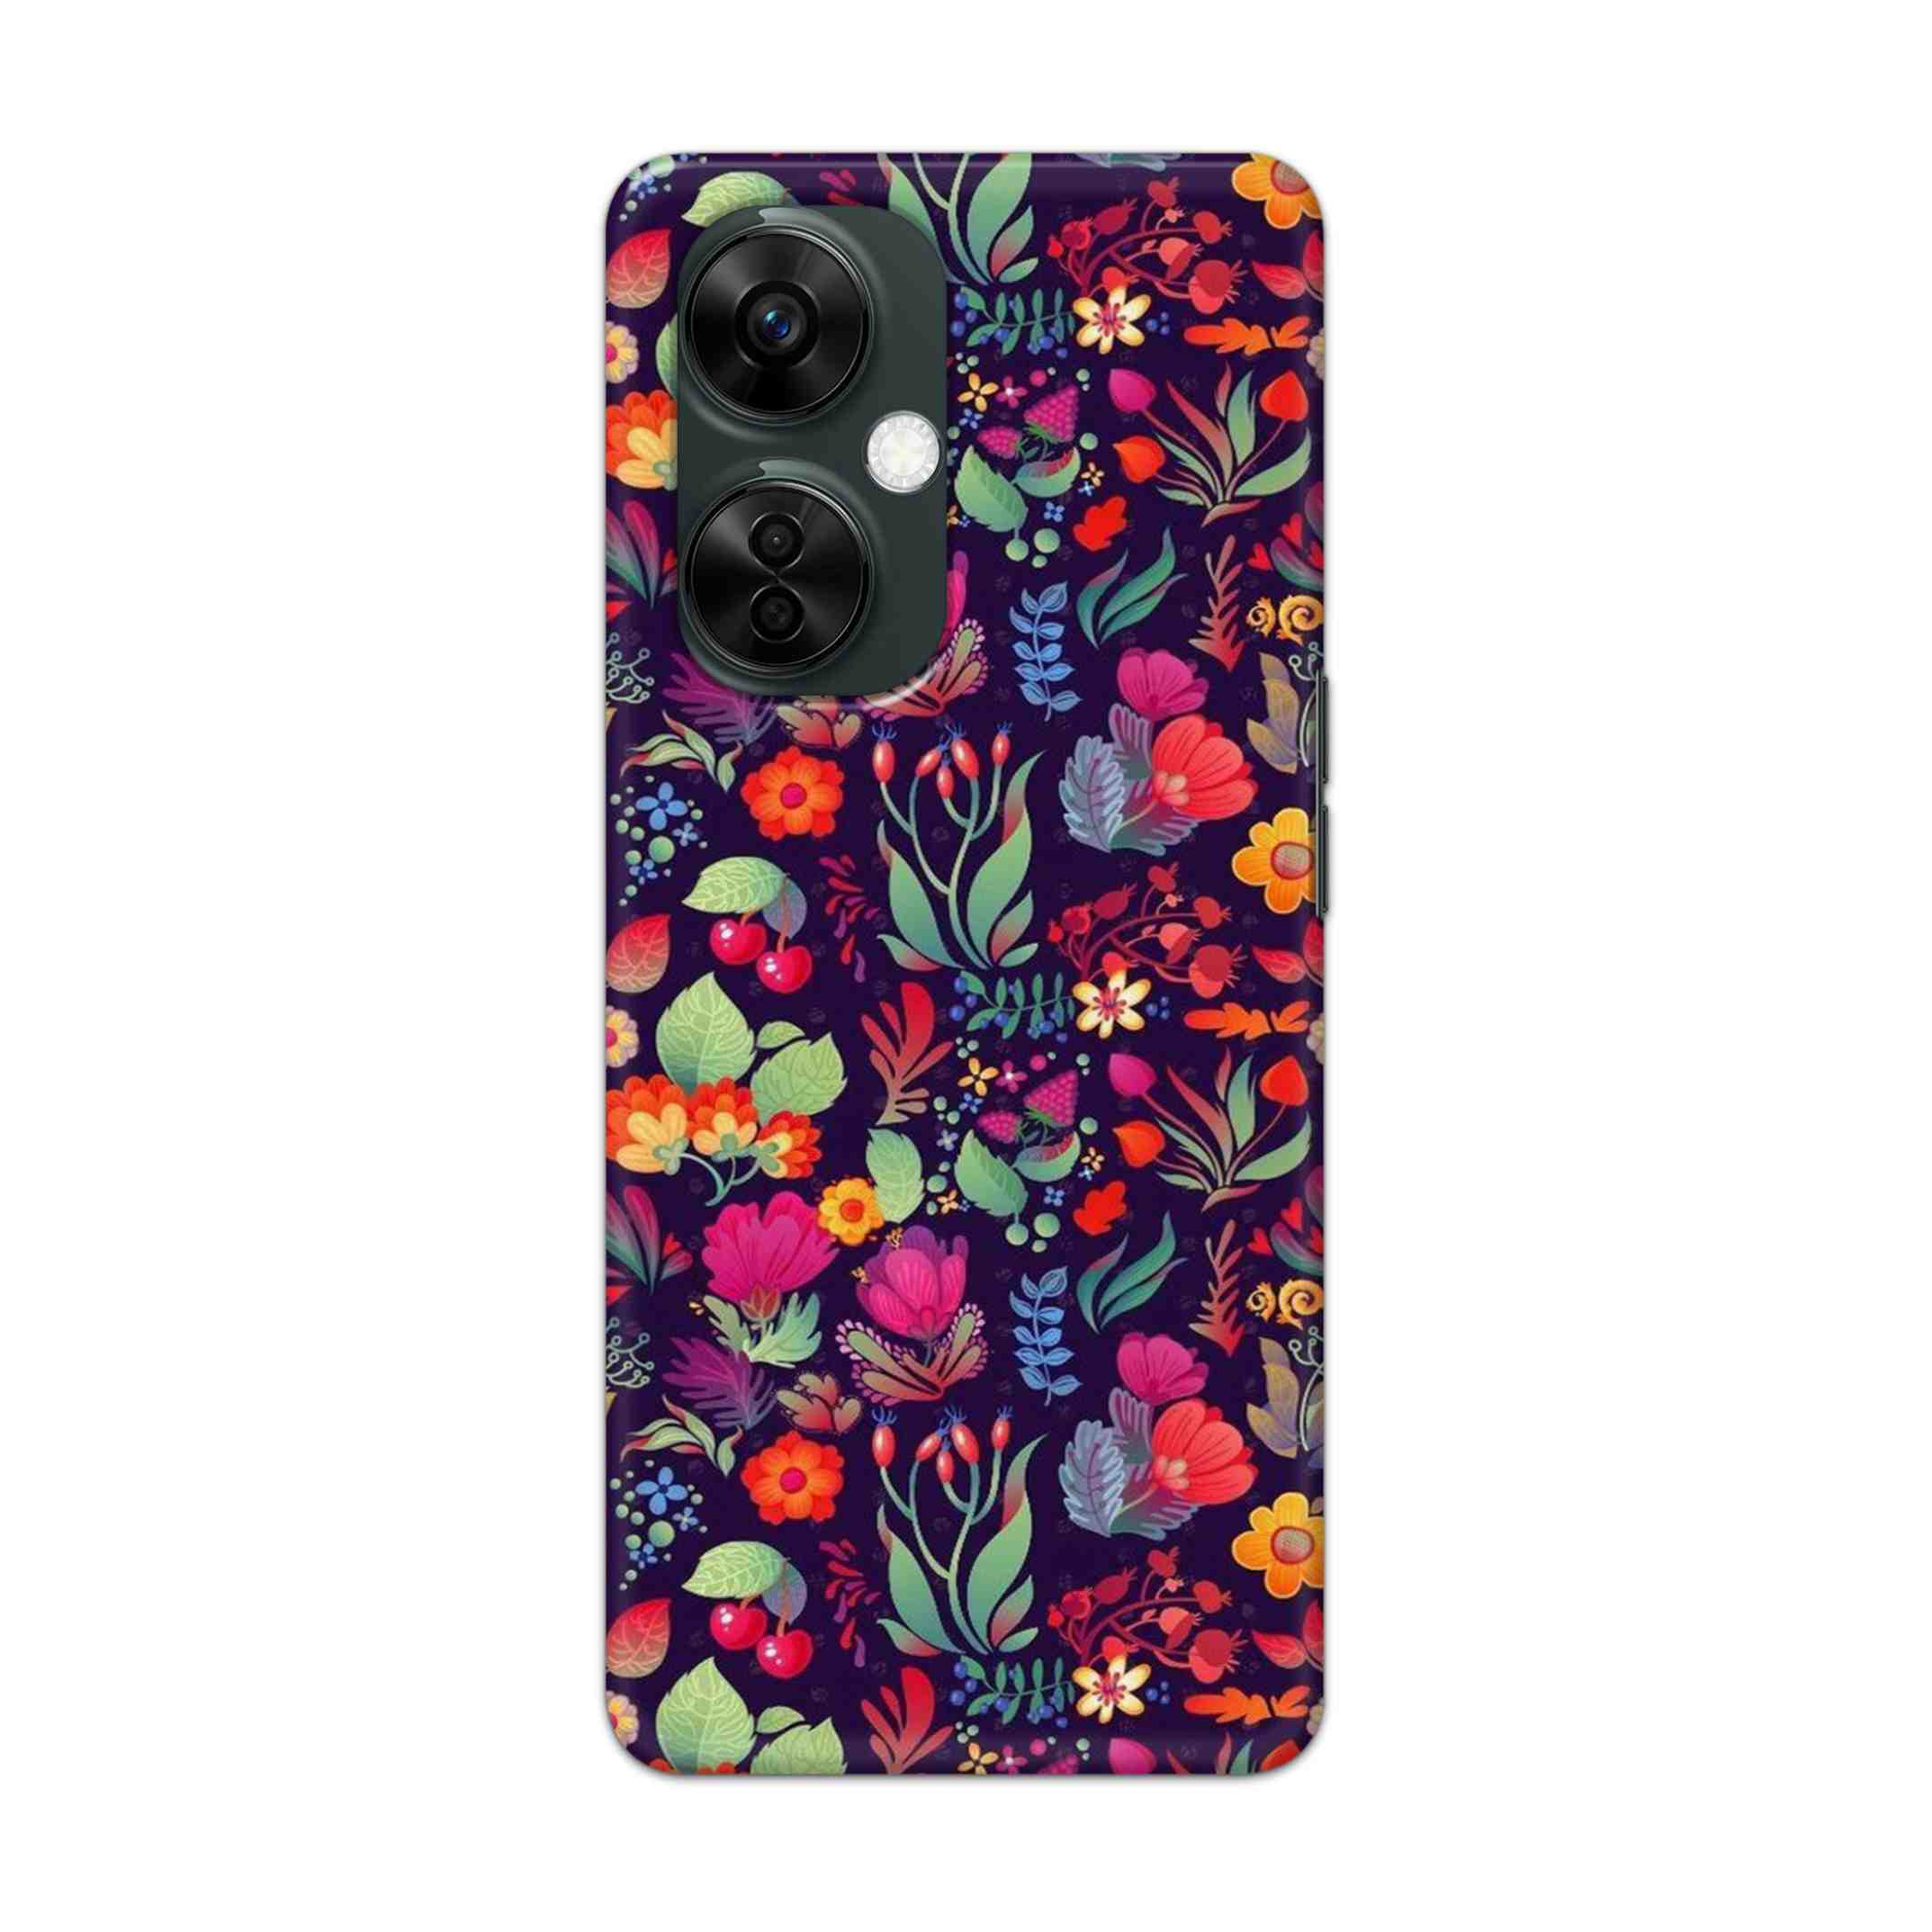 Buy Fruits Flower Hard Back Mobile Phone Case Cover For Oneplus Nord CE 3 Lite Online